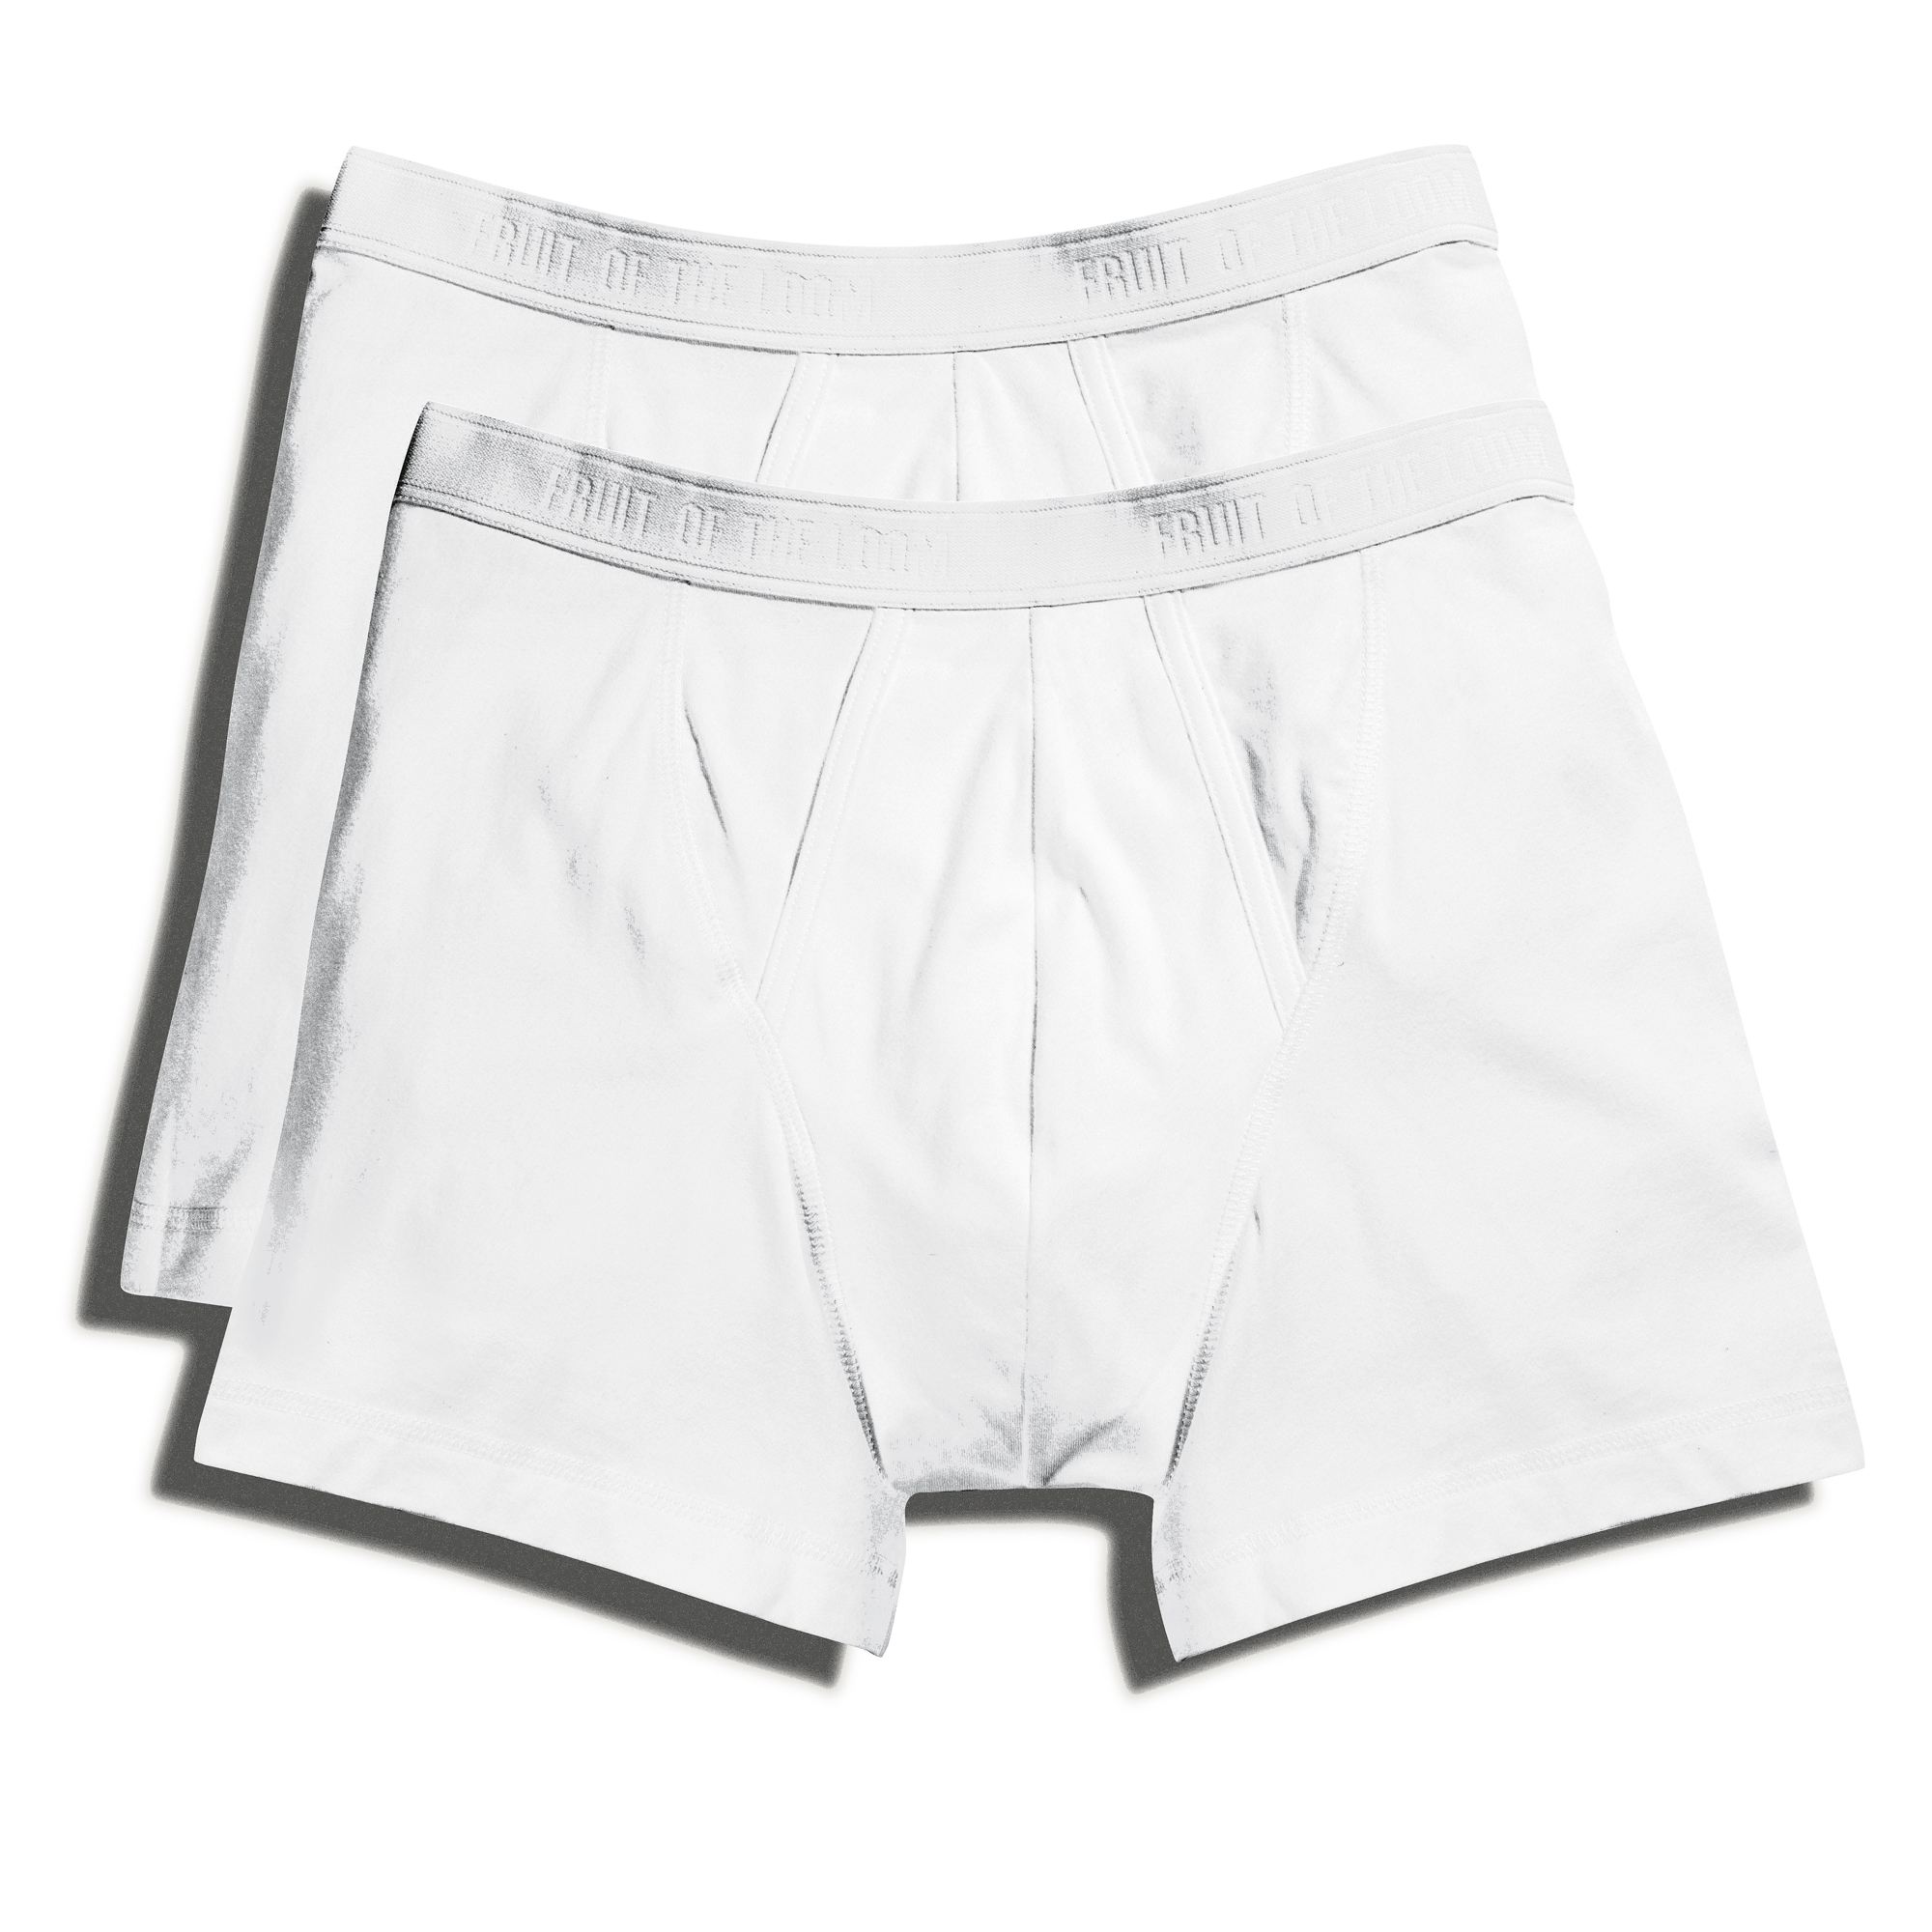 Calzoncillos Boxer Modelo Classic (pack De 2). Fruit Of The Loom